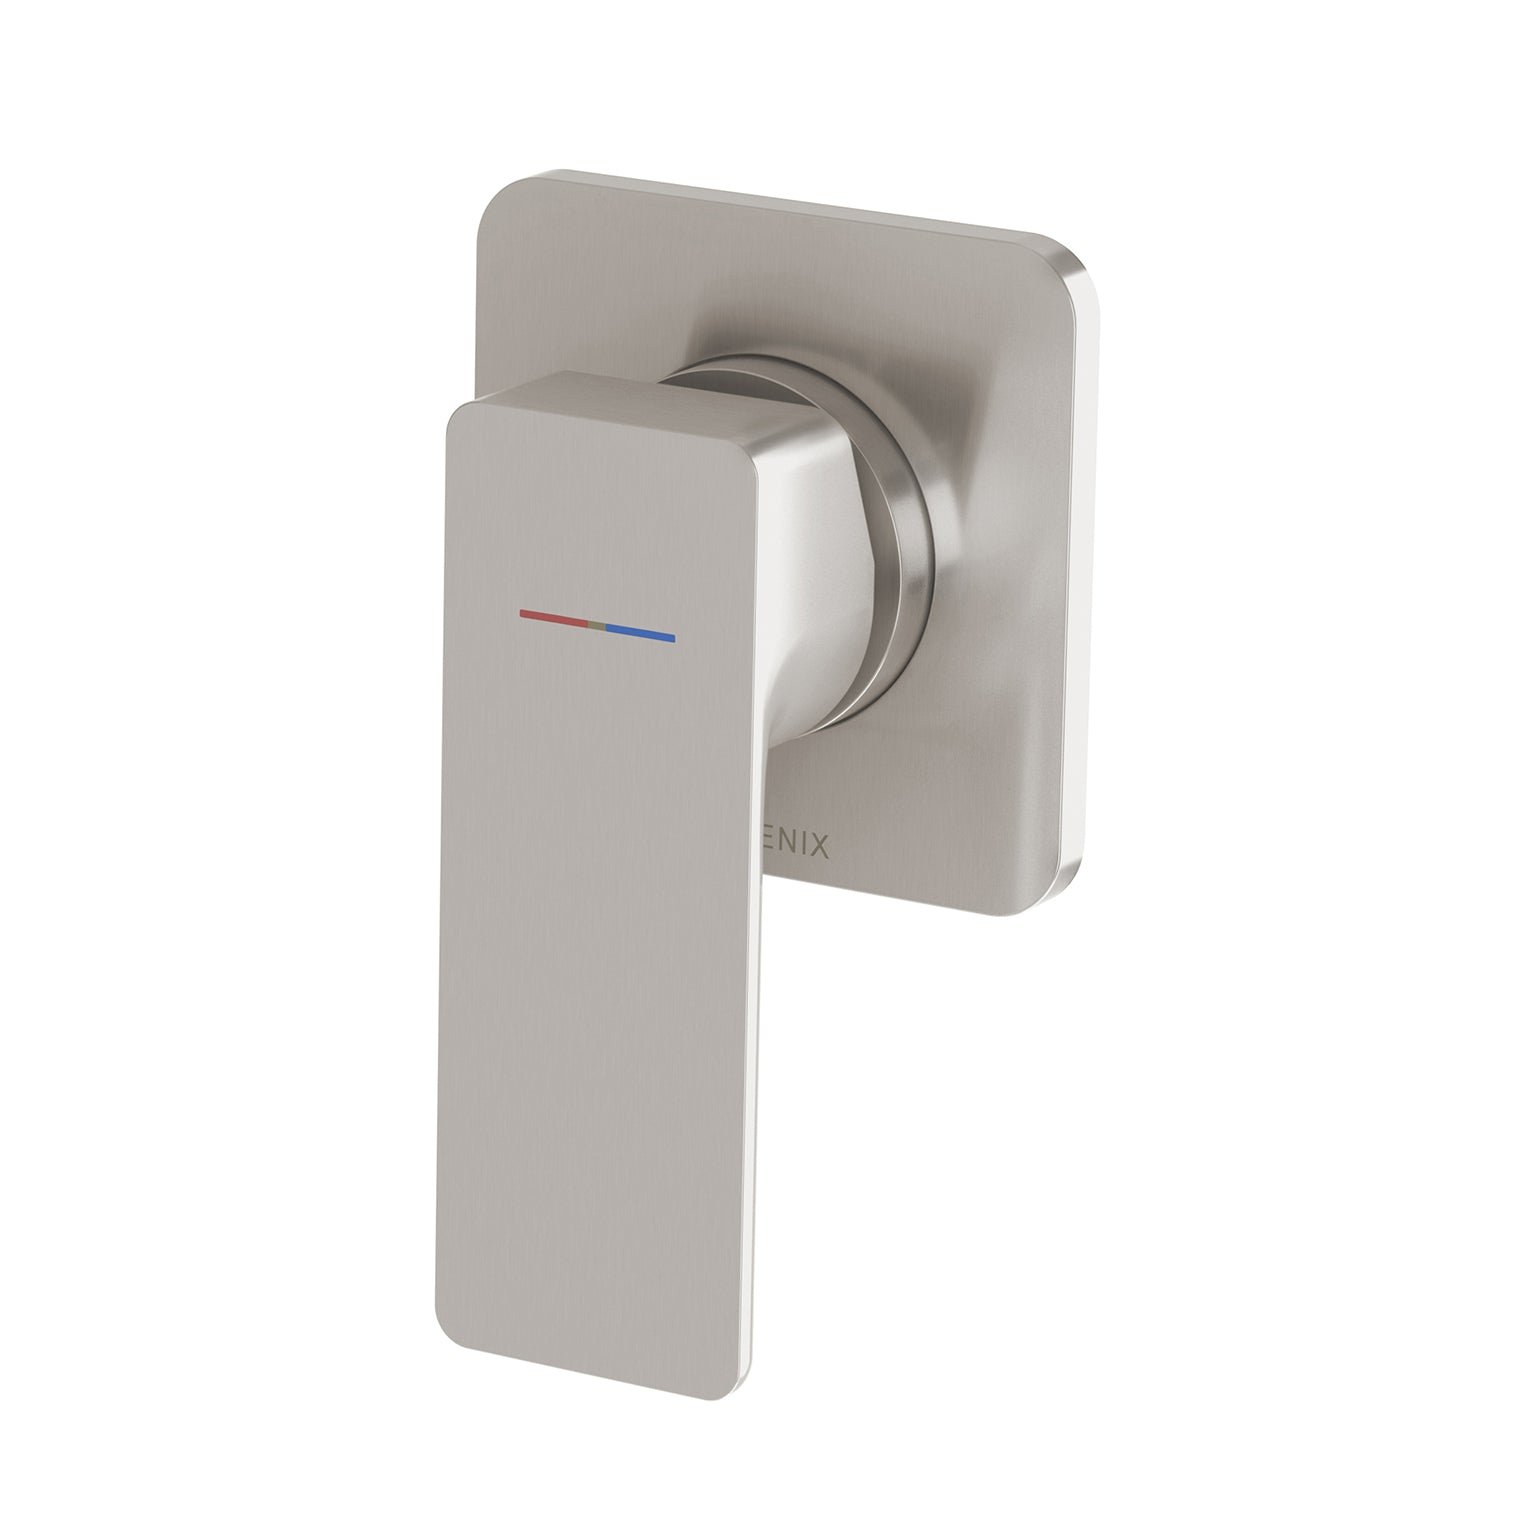 PHOENIX GLOSS MKII SWITCHMIX SHOWER / WALL MIXER FIT-OFF AND ROUGH-IN KIT BRUSHED NICKEL